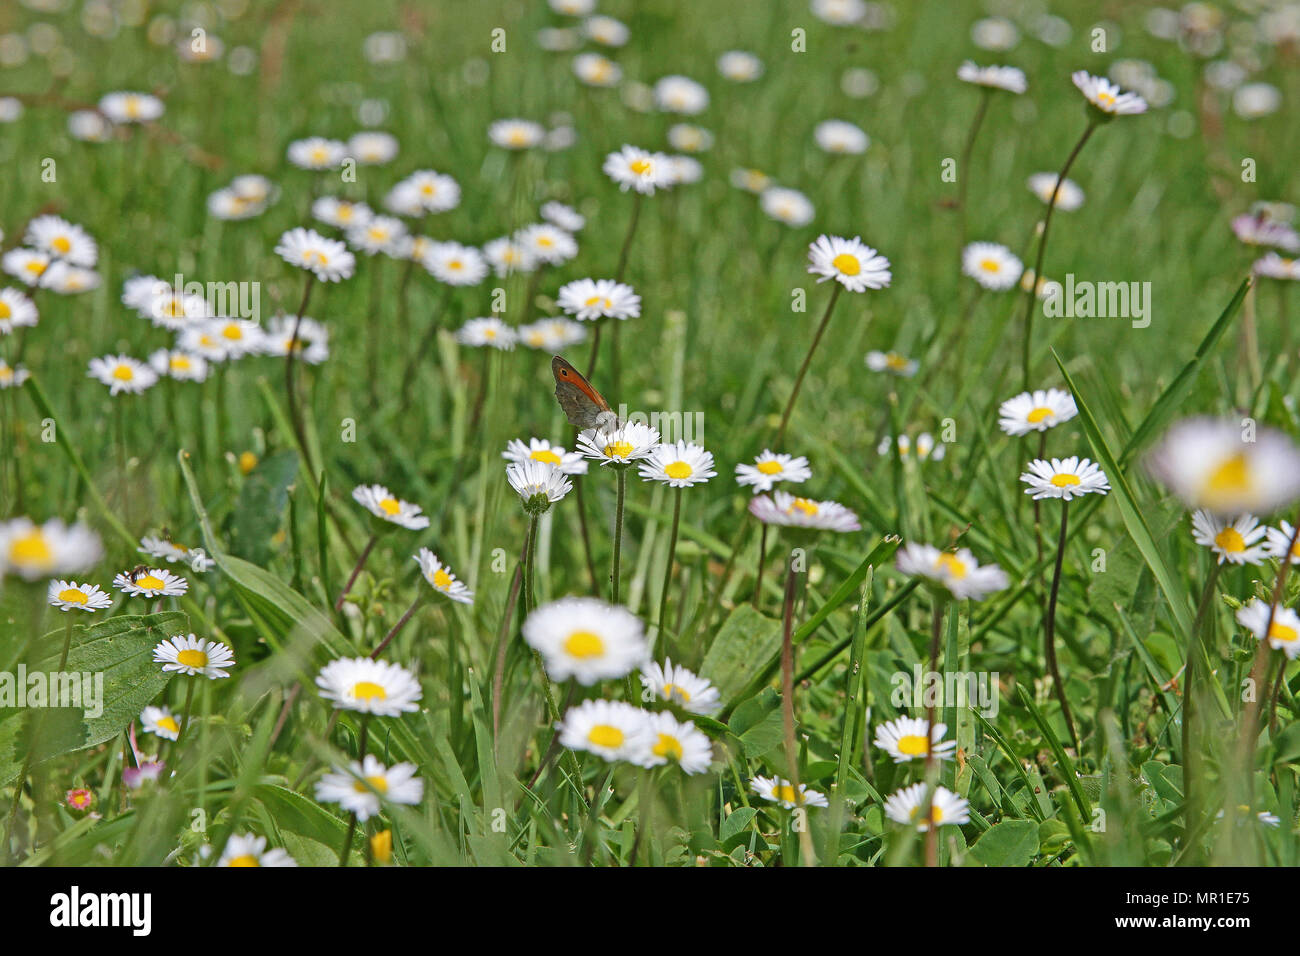 tiny small heath butterfly close up Latin coenonympha pamphilus feeding on a daisy in a field of daisies Latin bellis perennis compositae in Italy Stock Photo